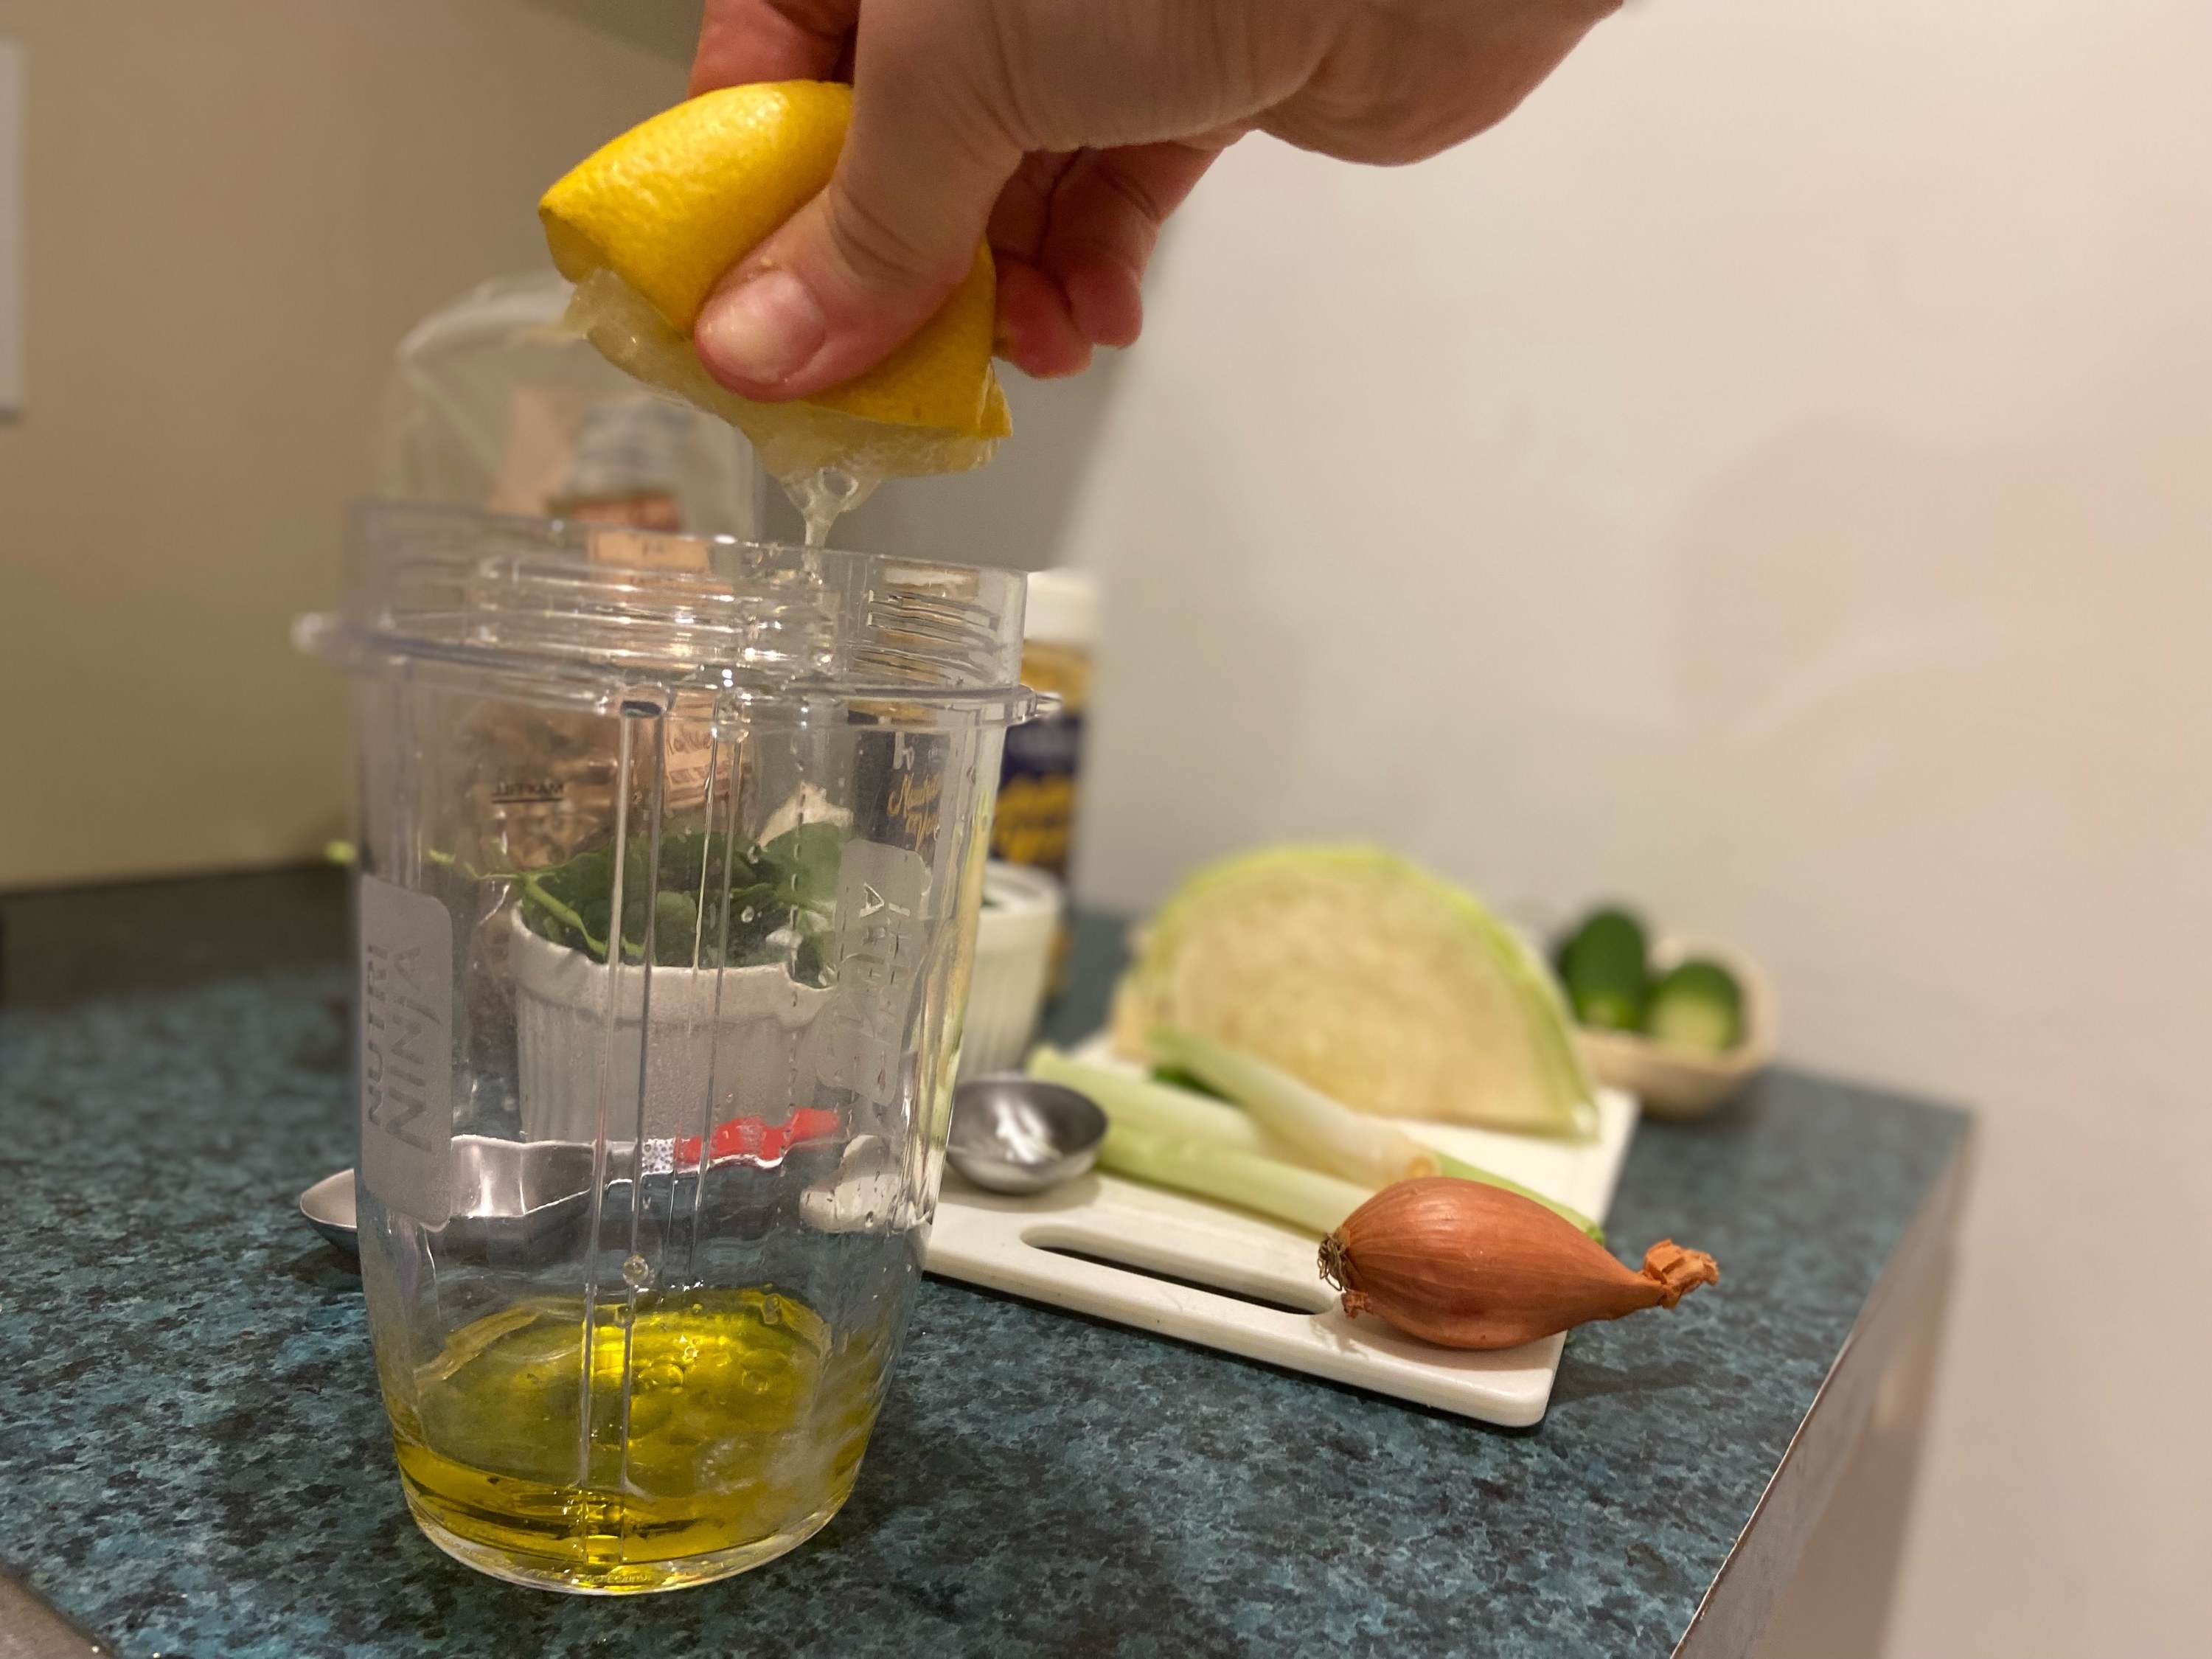 Jen squeezing lemon juice into measuring cup with the oil